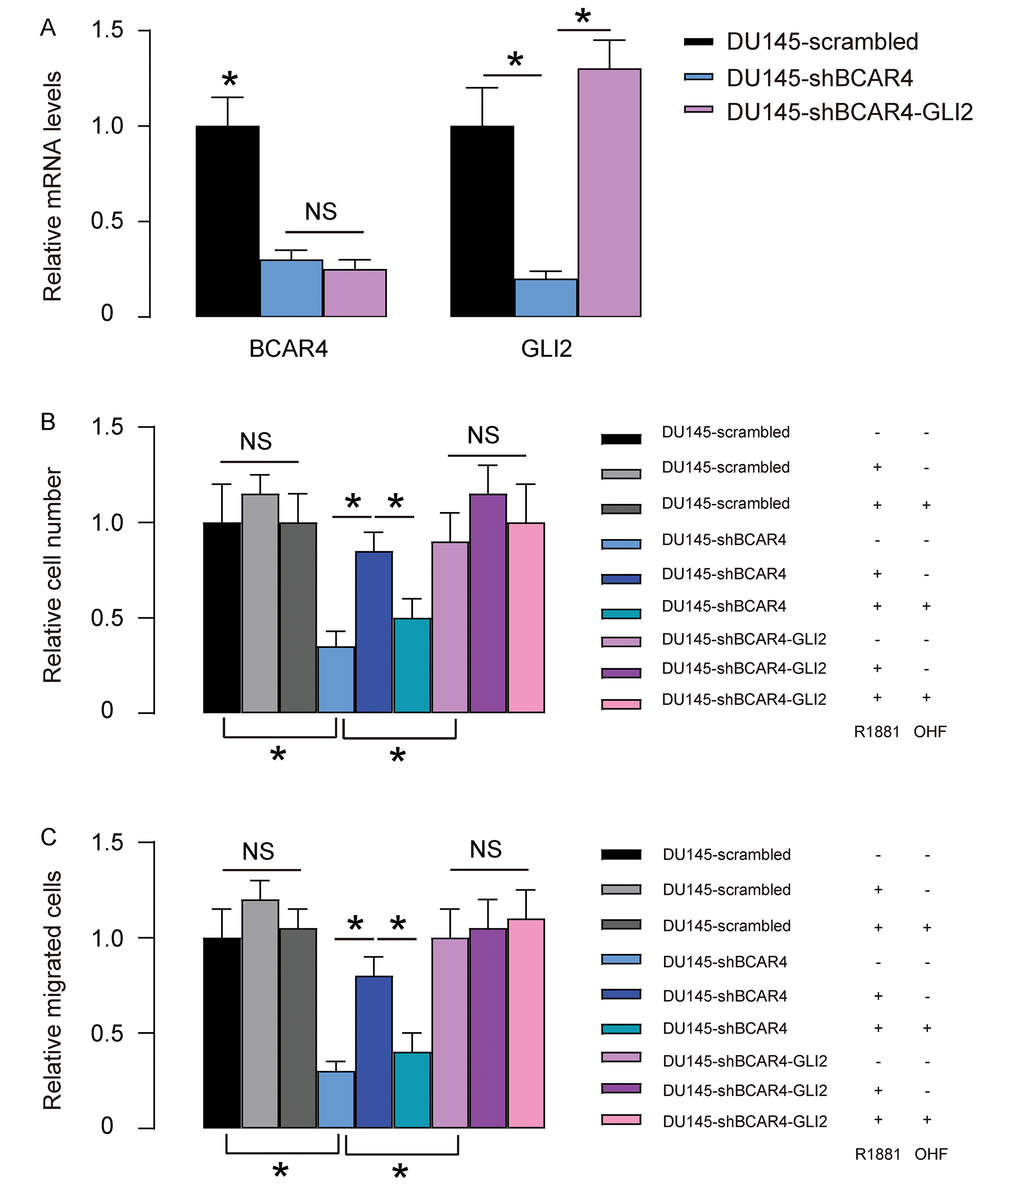 Overexpression of GLI2 abolishes the effects of shBCAR4 on growth and migration of DU145 cells. (A) We overexpressed GLI2 in shBCAR4-transfected DU145 cells and did RT-qPCR for BCAR4 and GLI2. Transfection with GLI2 significantly increased GLI2 but did not alter BCAR4 levels. (B-C) These cells (GLI2 and shBCAR4-transfected cells, shBCAR4-transfected cells and control scrambled-transfected cells) were treated with null, R1881, with/without OHF. (B) Cell growth was examined in an CCK-8 assay (C) Cell migration potential was assessed in a transwell assay. *p